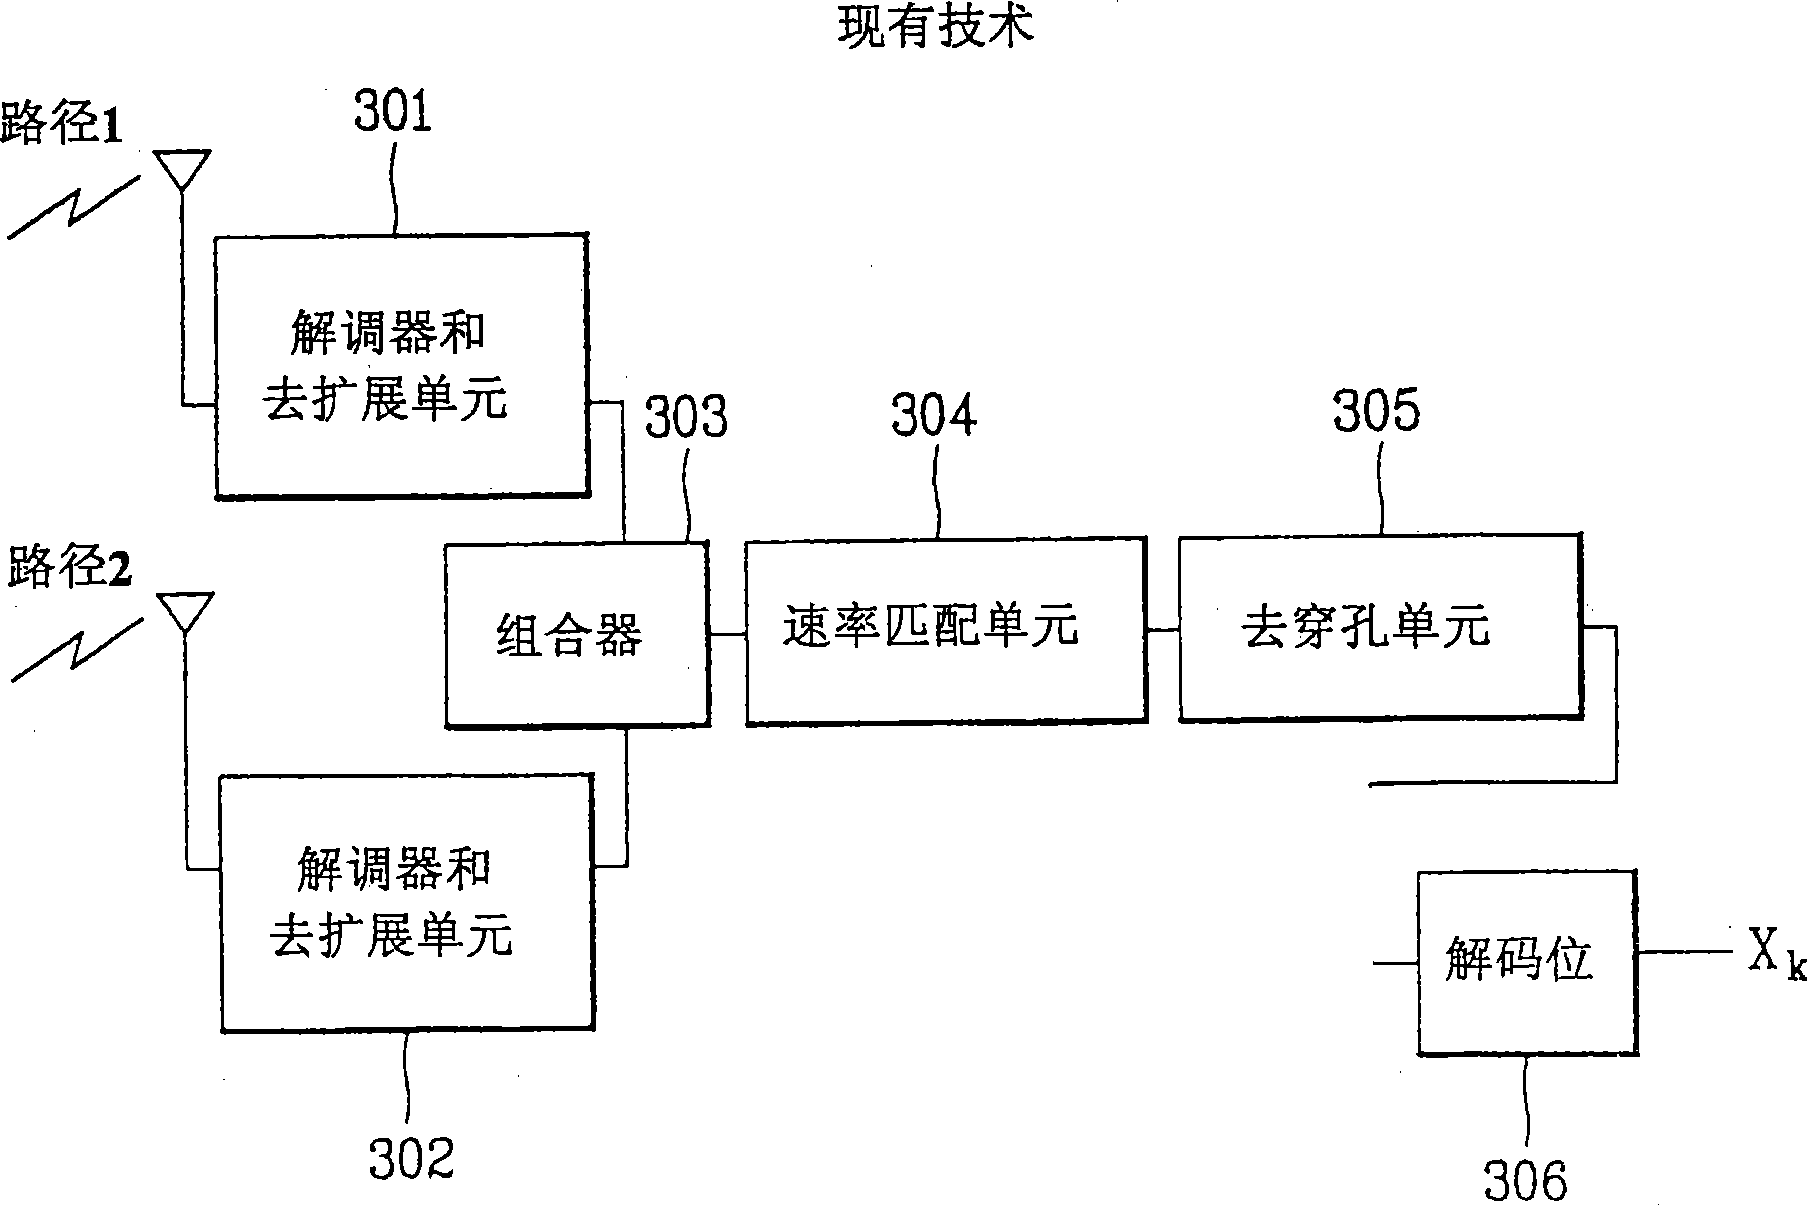 Communication system and method for processing signals therein